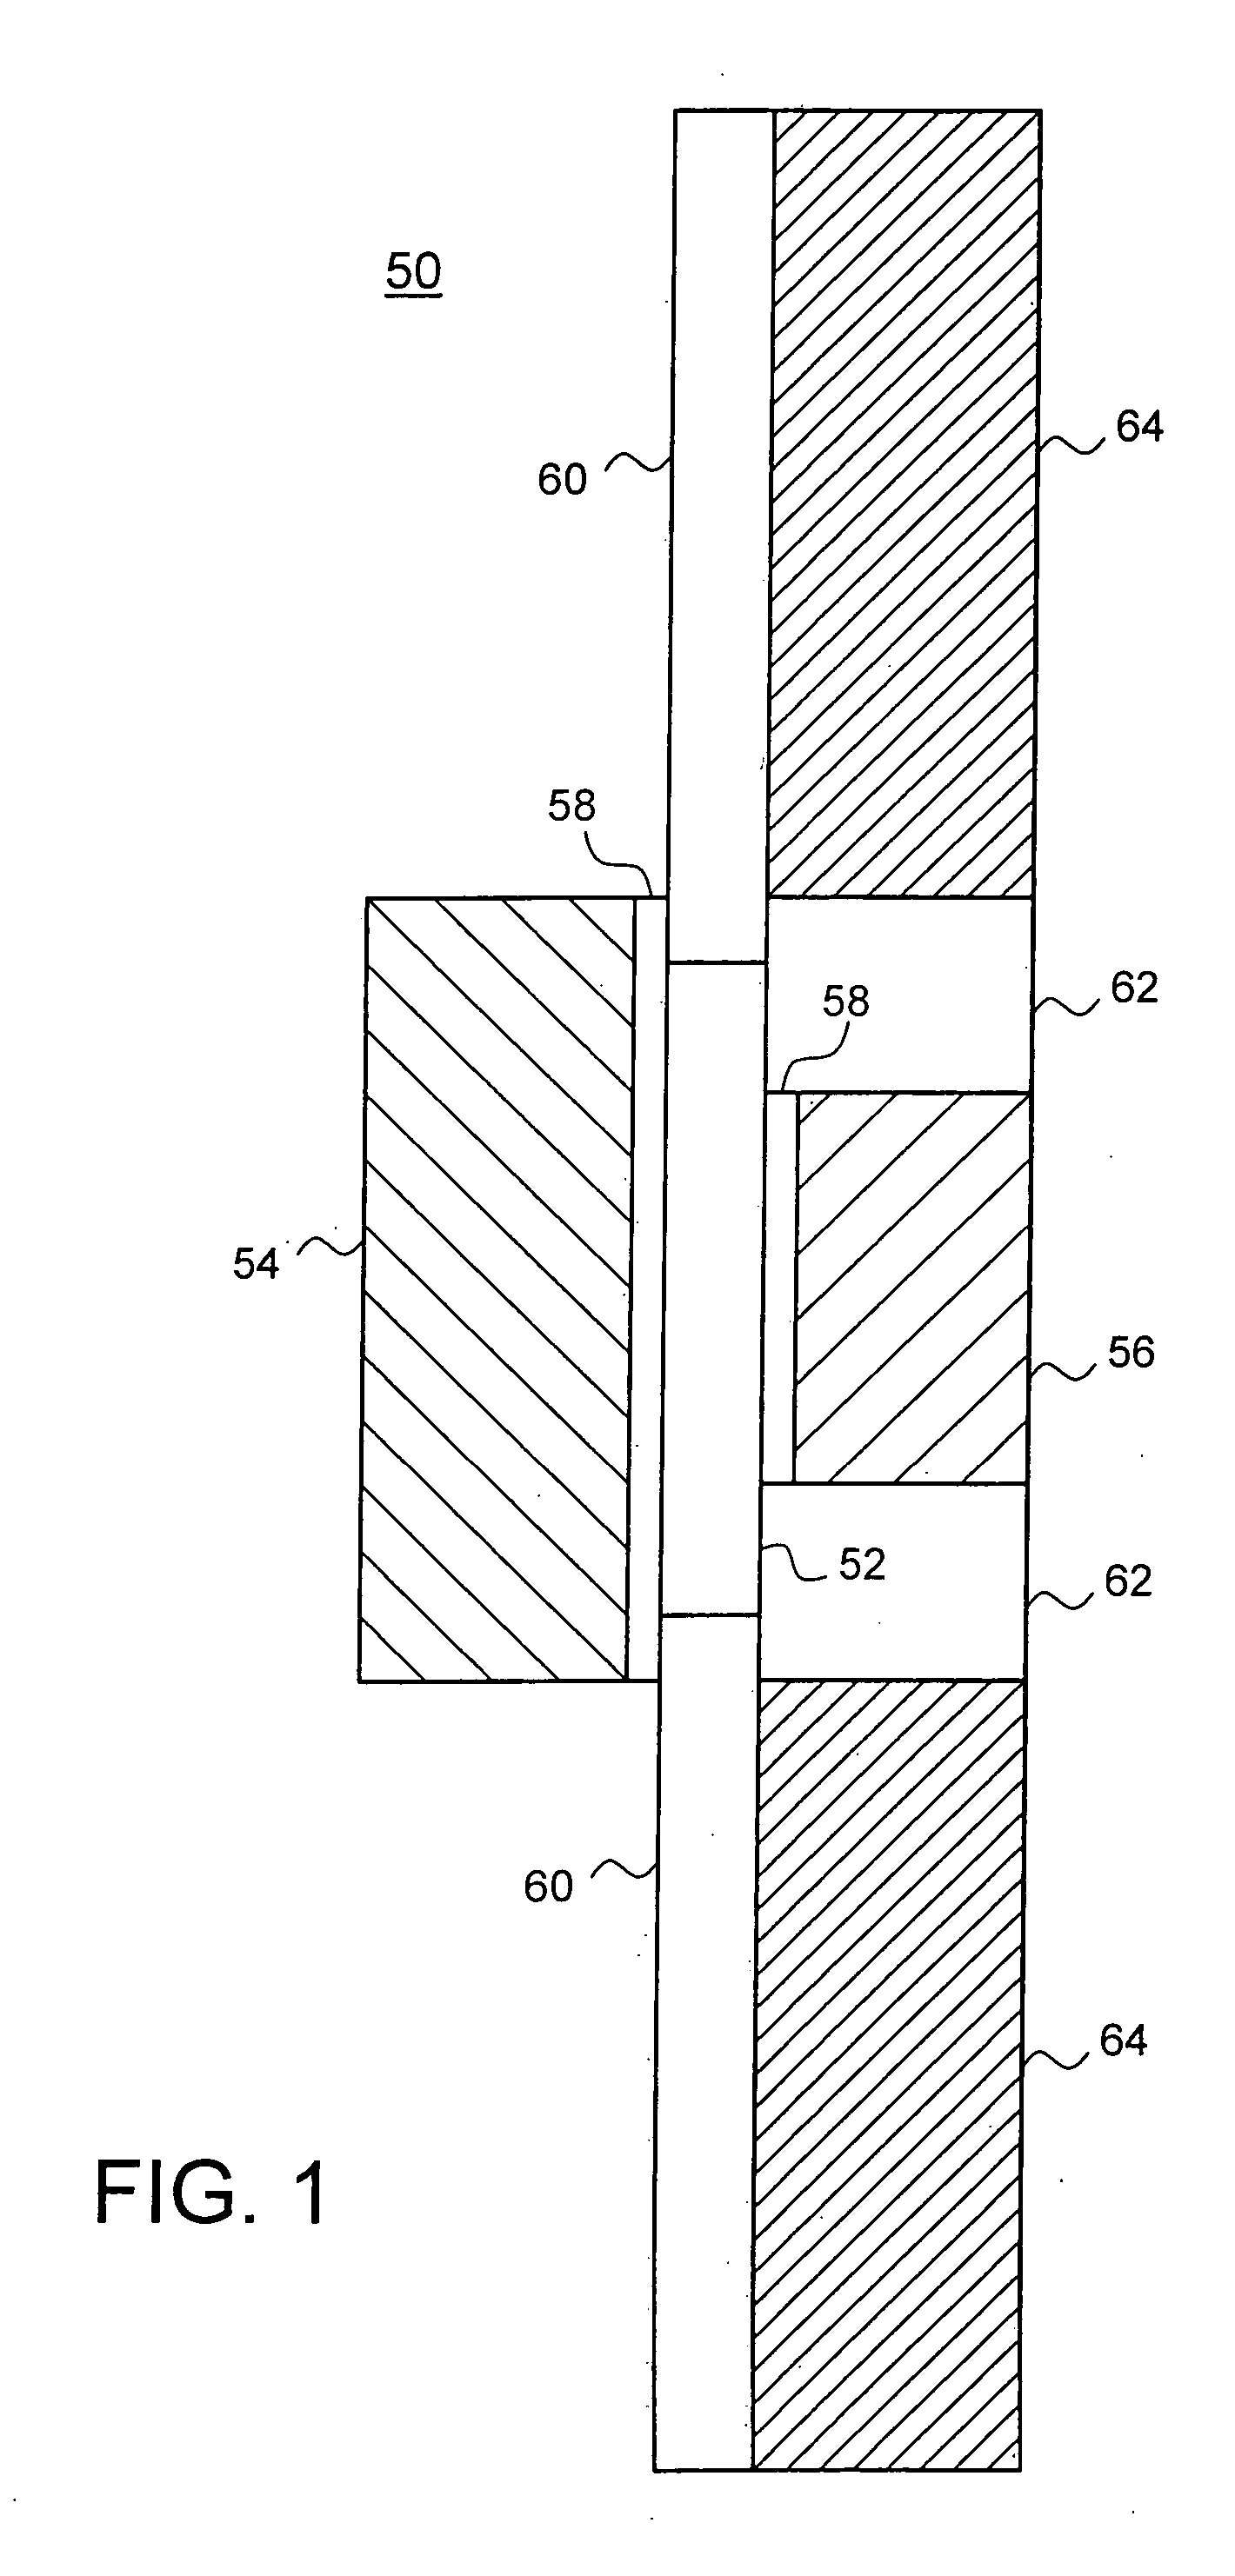 Doubly asymmetric double gate transistor structure